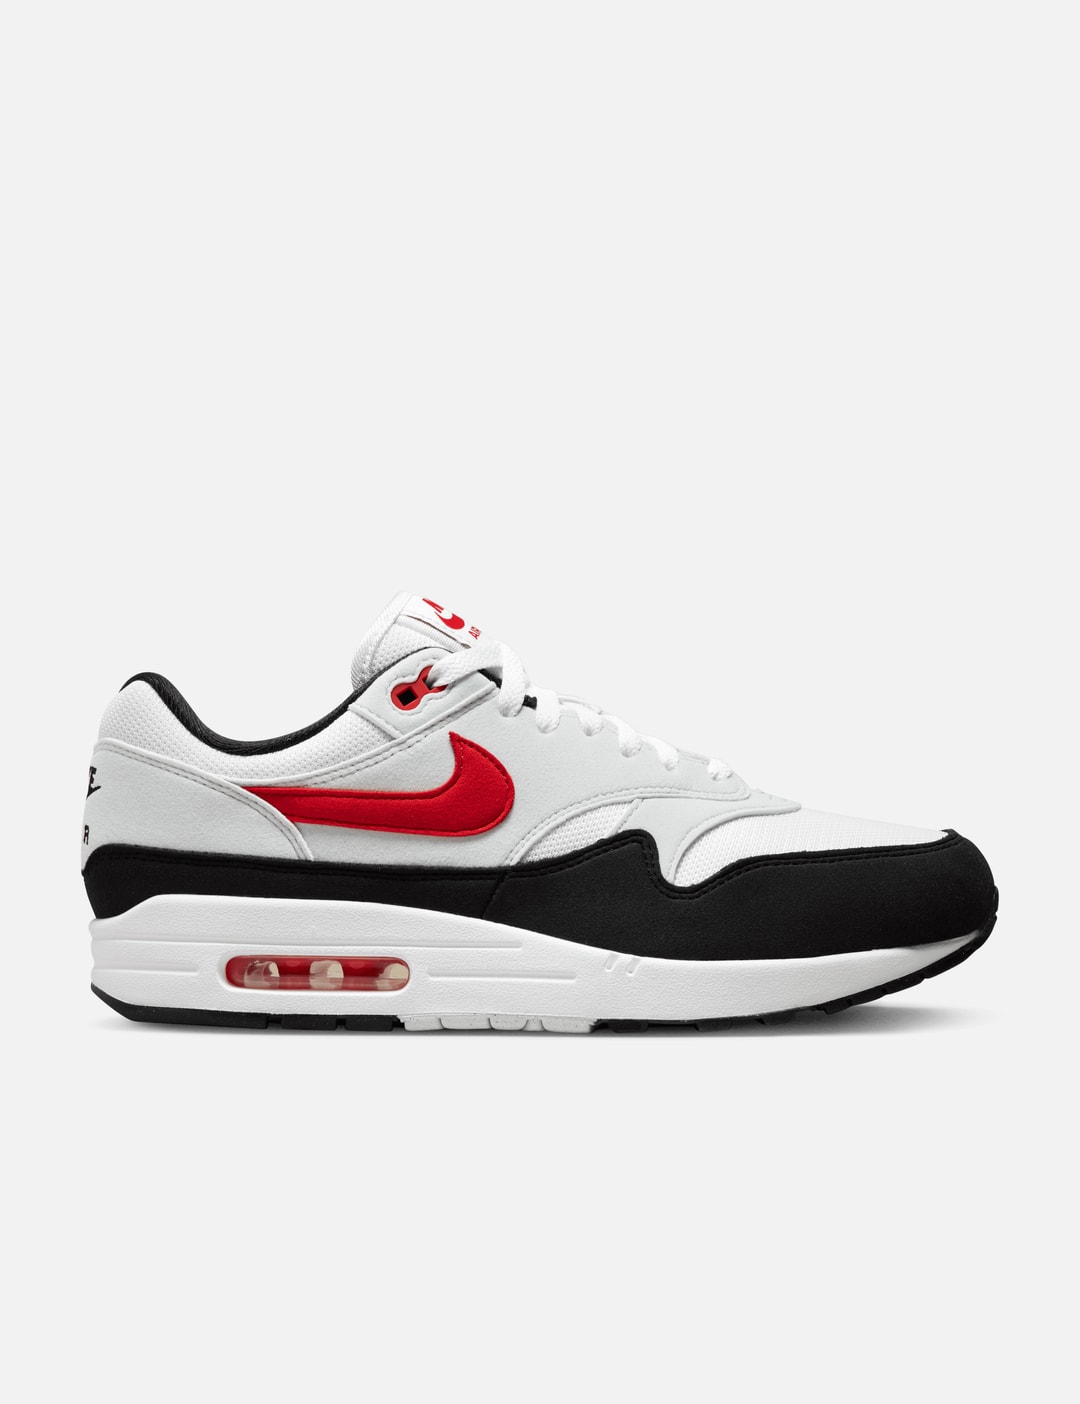 Nike - Nike Air Max 1 | HBX - Globally Curated Fashion and Lifestyle by ...